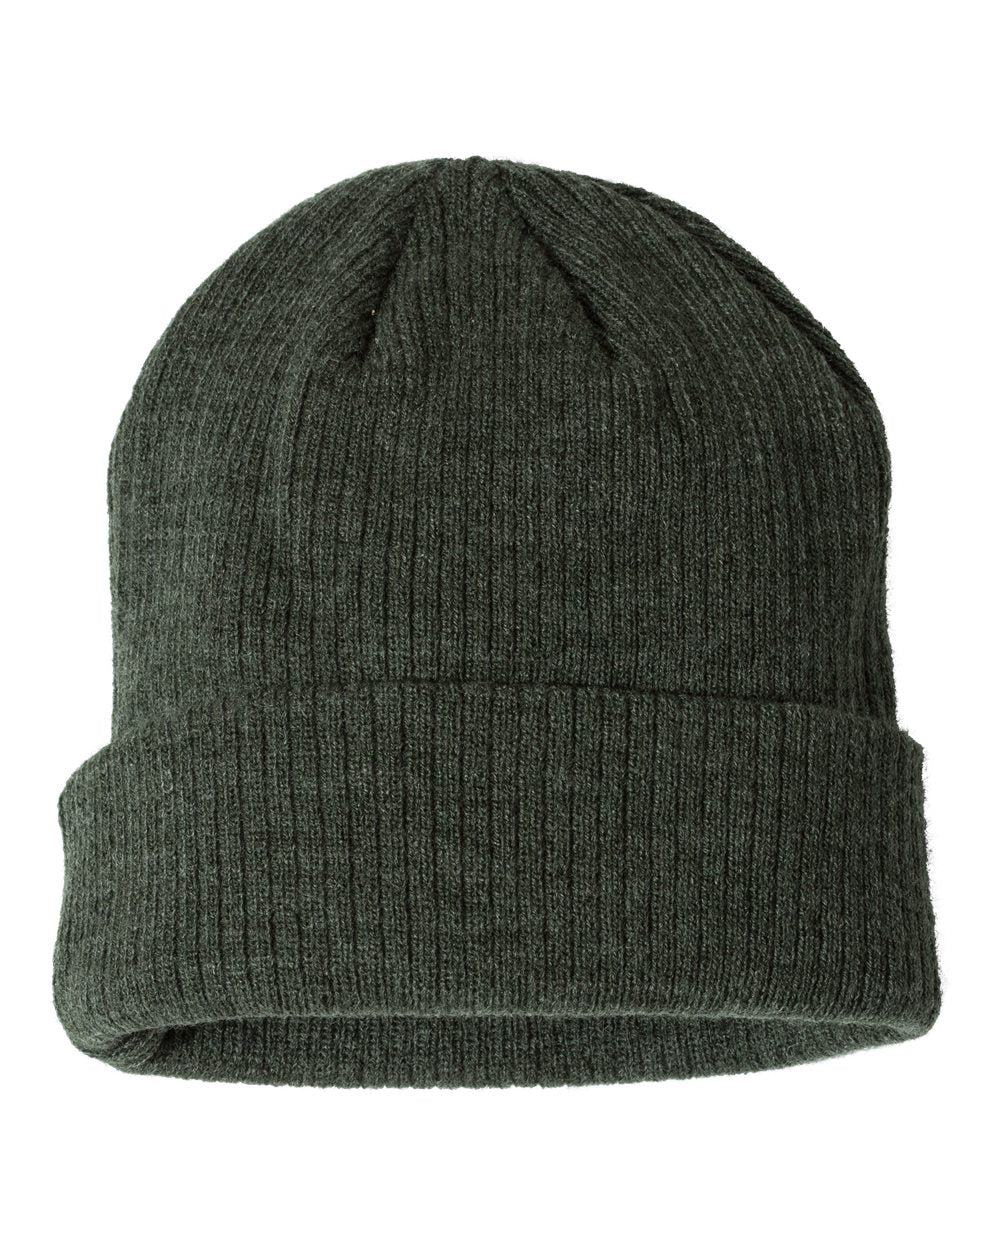 Champion Ribbed Cuffed Beanie- Heather Forest - Ten Gallon Hat Co.